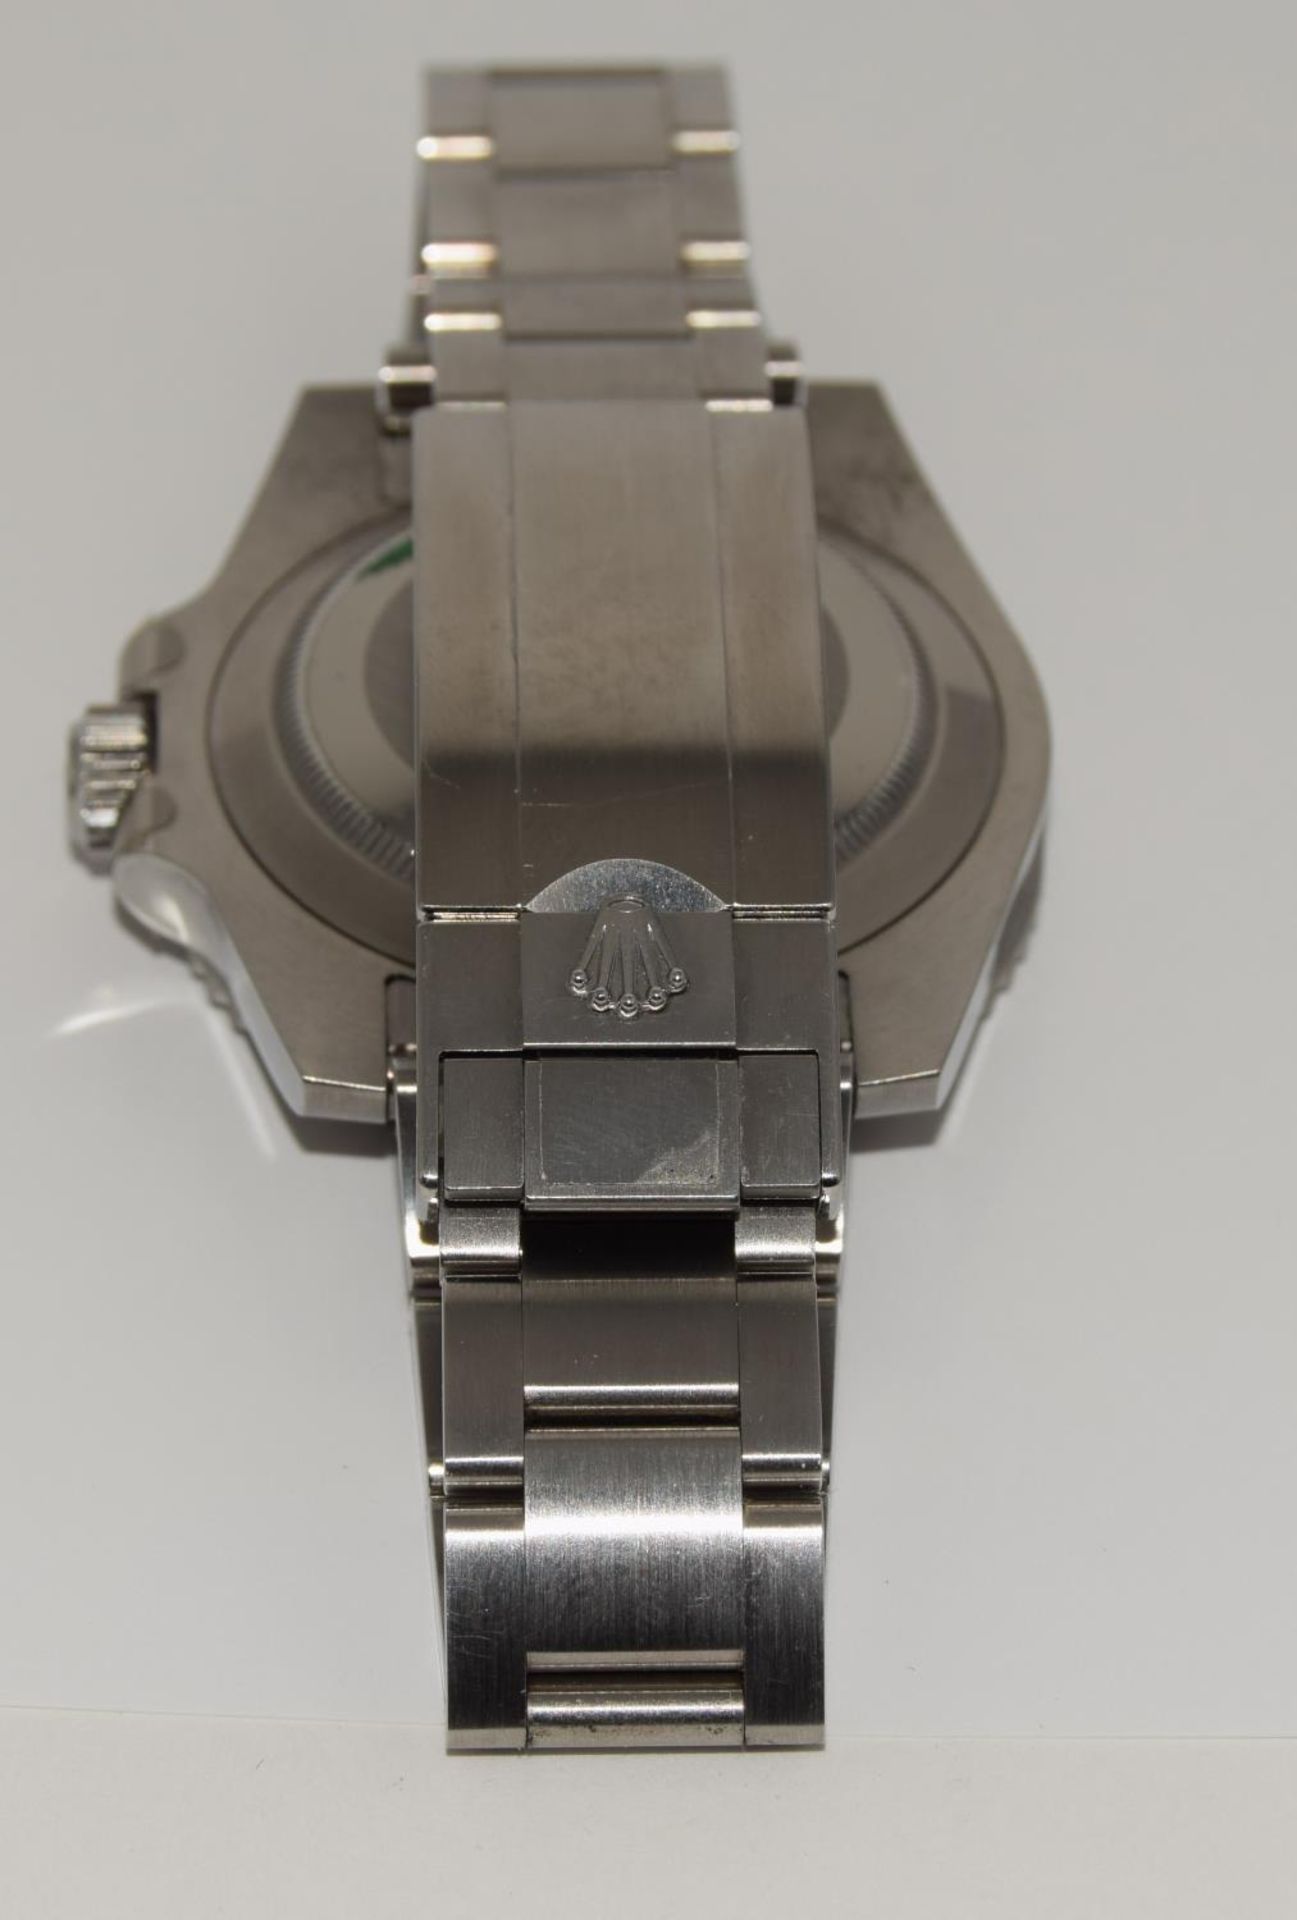 Rolex Submariner Non Date, model 114060, 2018, Boxed and papers. (ref 37) - Image 7 of 9